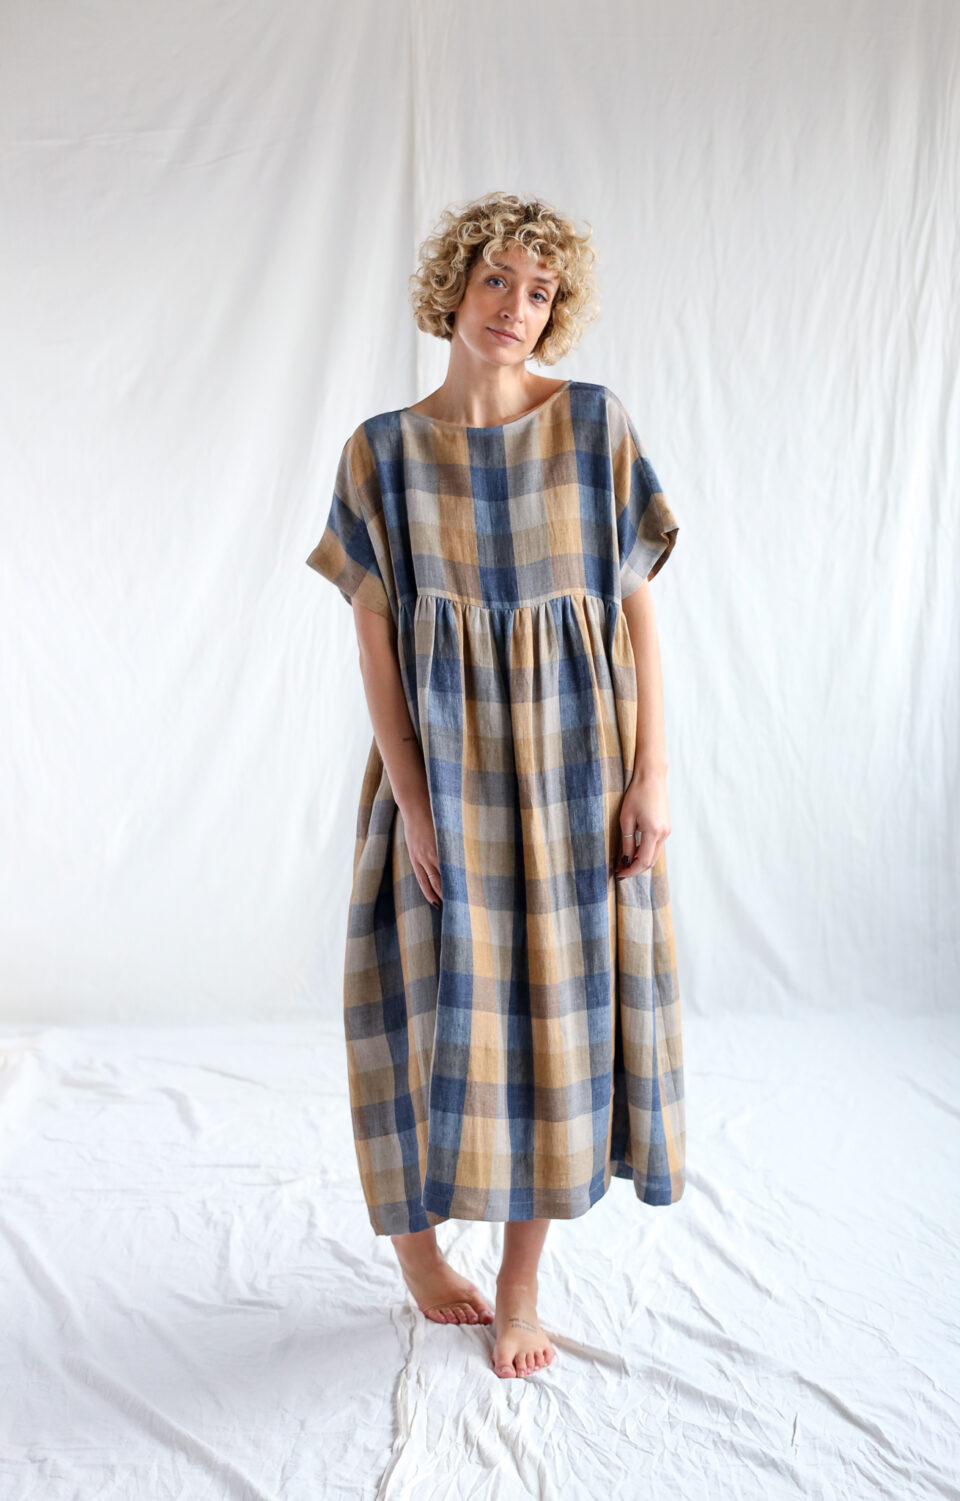 Linen oversize dress in checks SILVINA | Dress | Sustainable clothing | OffOn clothing